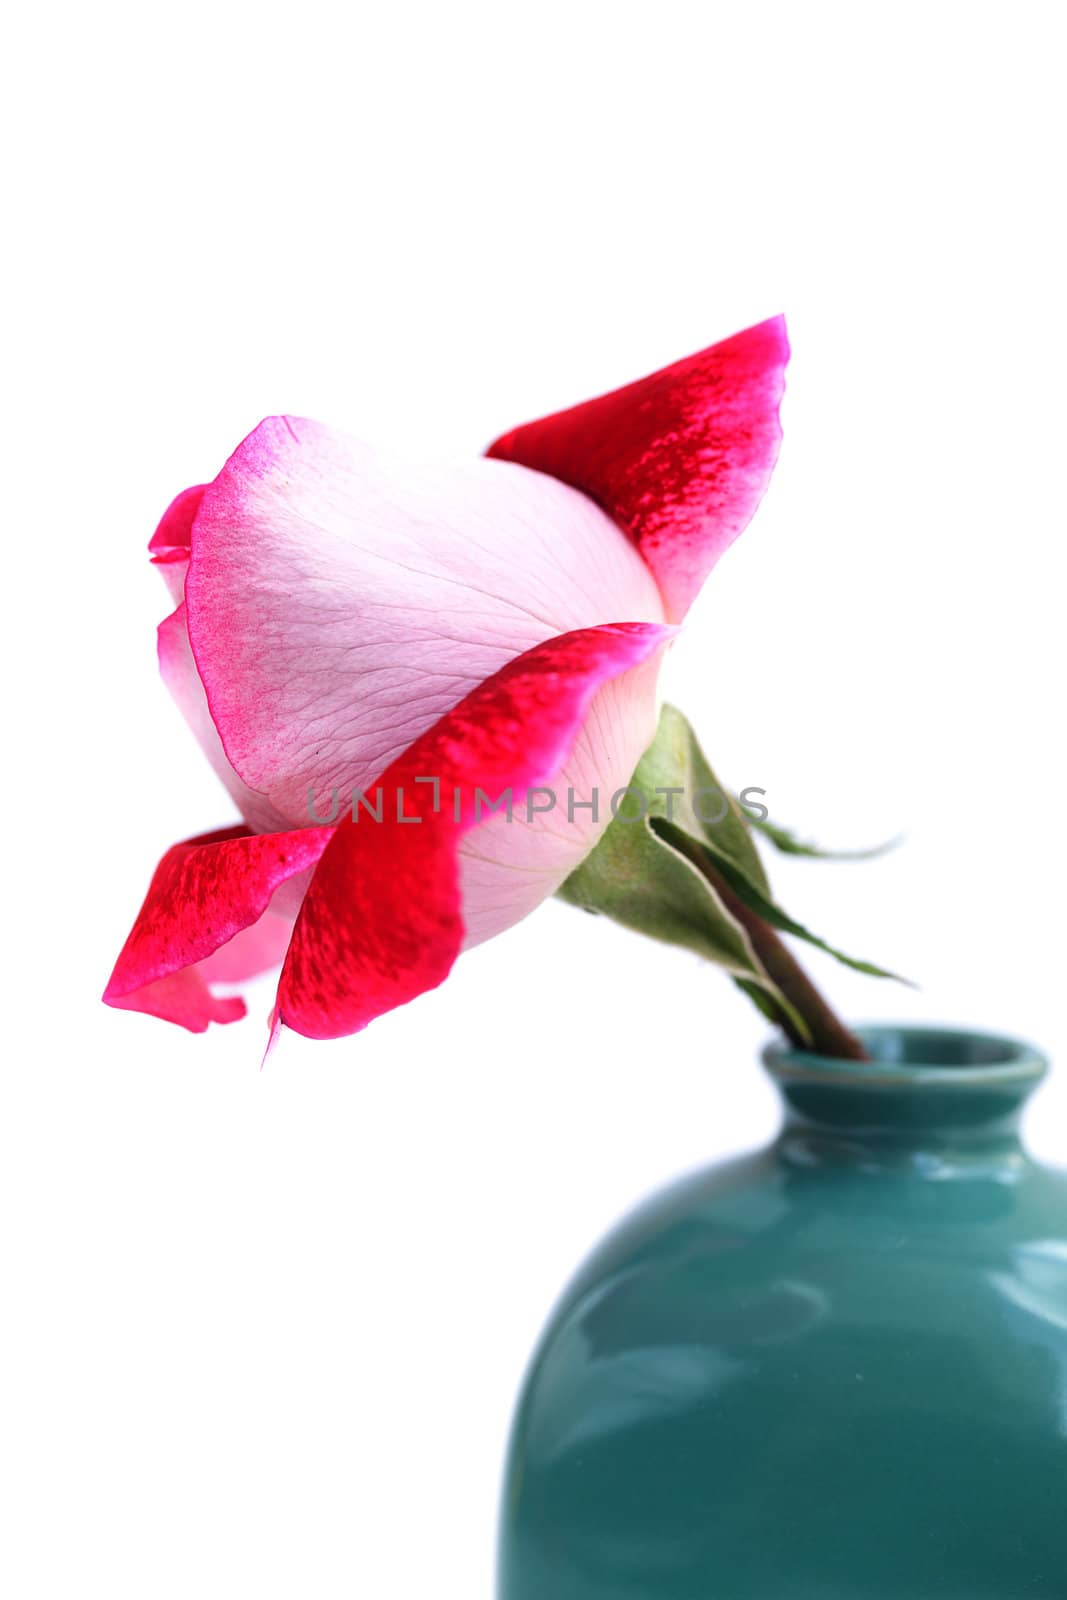 unusual beautiful red rose in a vase by jannyjus